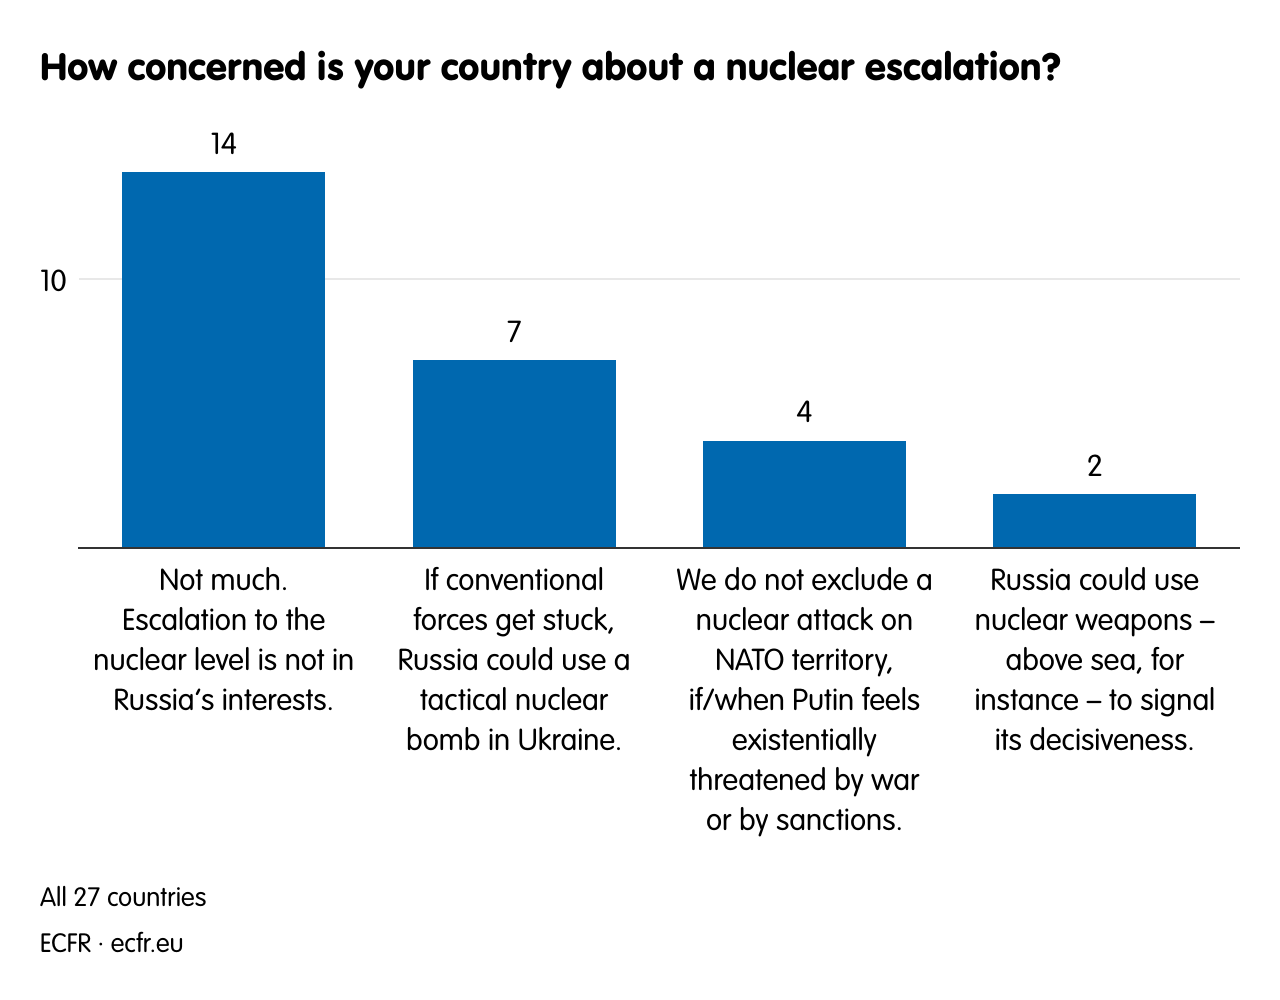 How concerned is your country about a nuclear escalation?